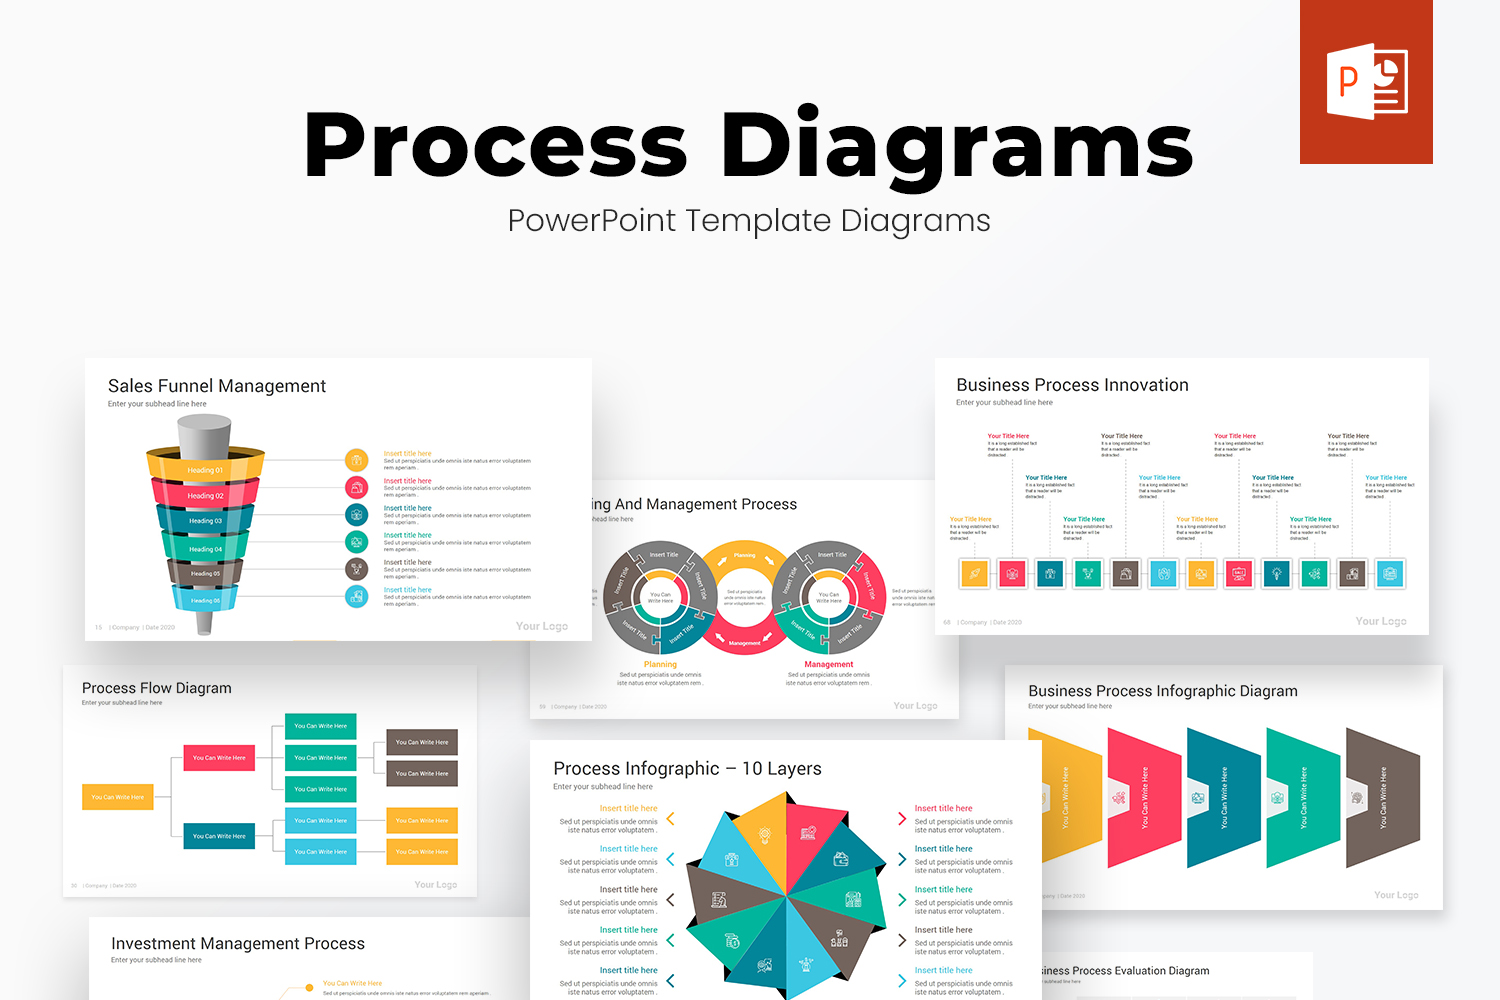 Process Diagrams PowerPoint Template Design